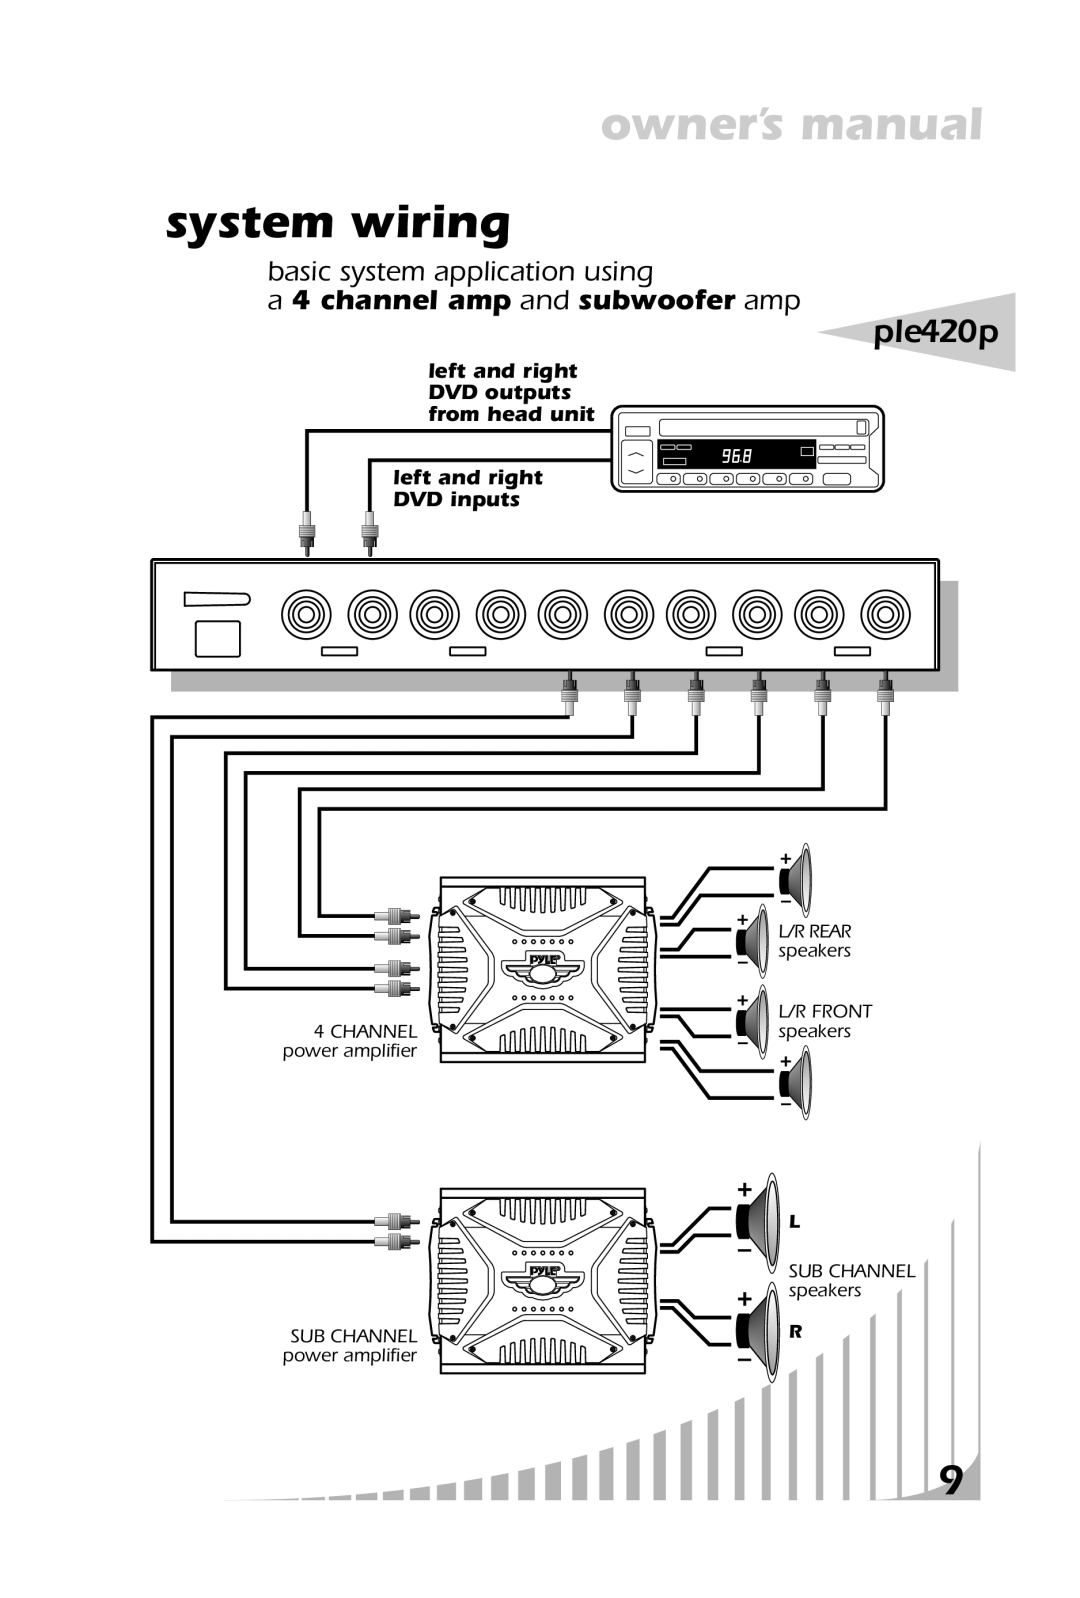 PYLE Audio ple420p owner manual system wiring, a 4 channel amp and subwoofer amp, left and right DVD outputs from head unit 